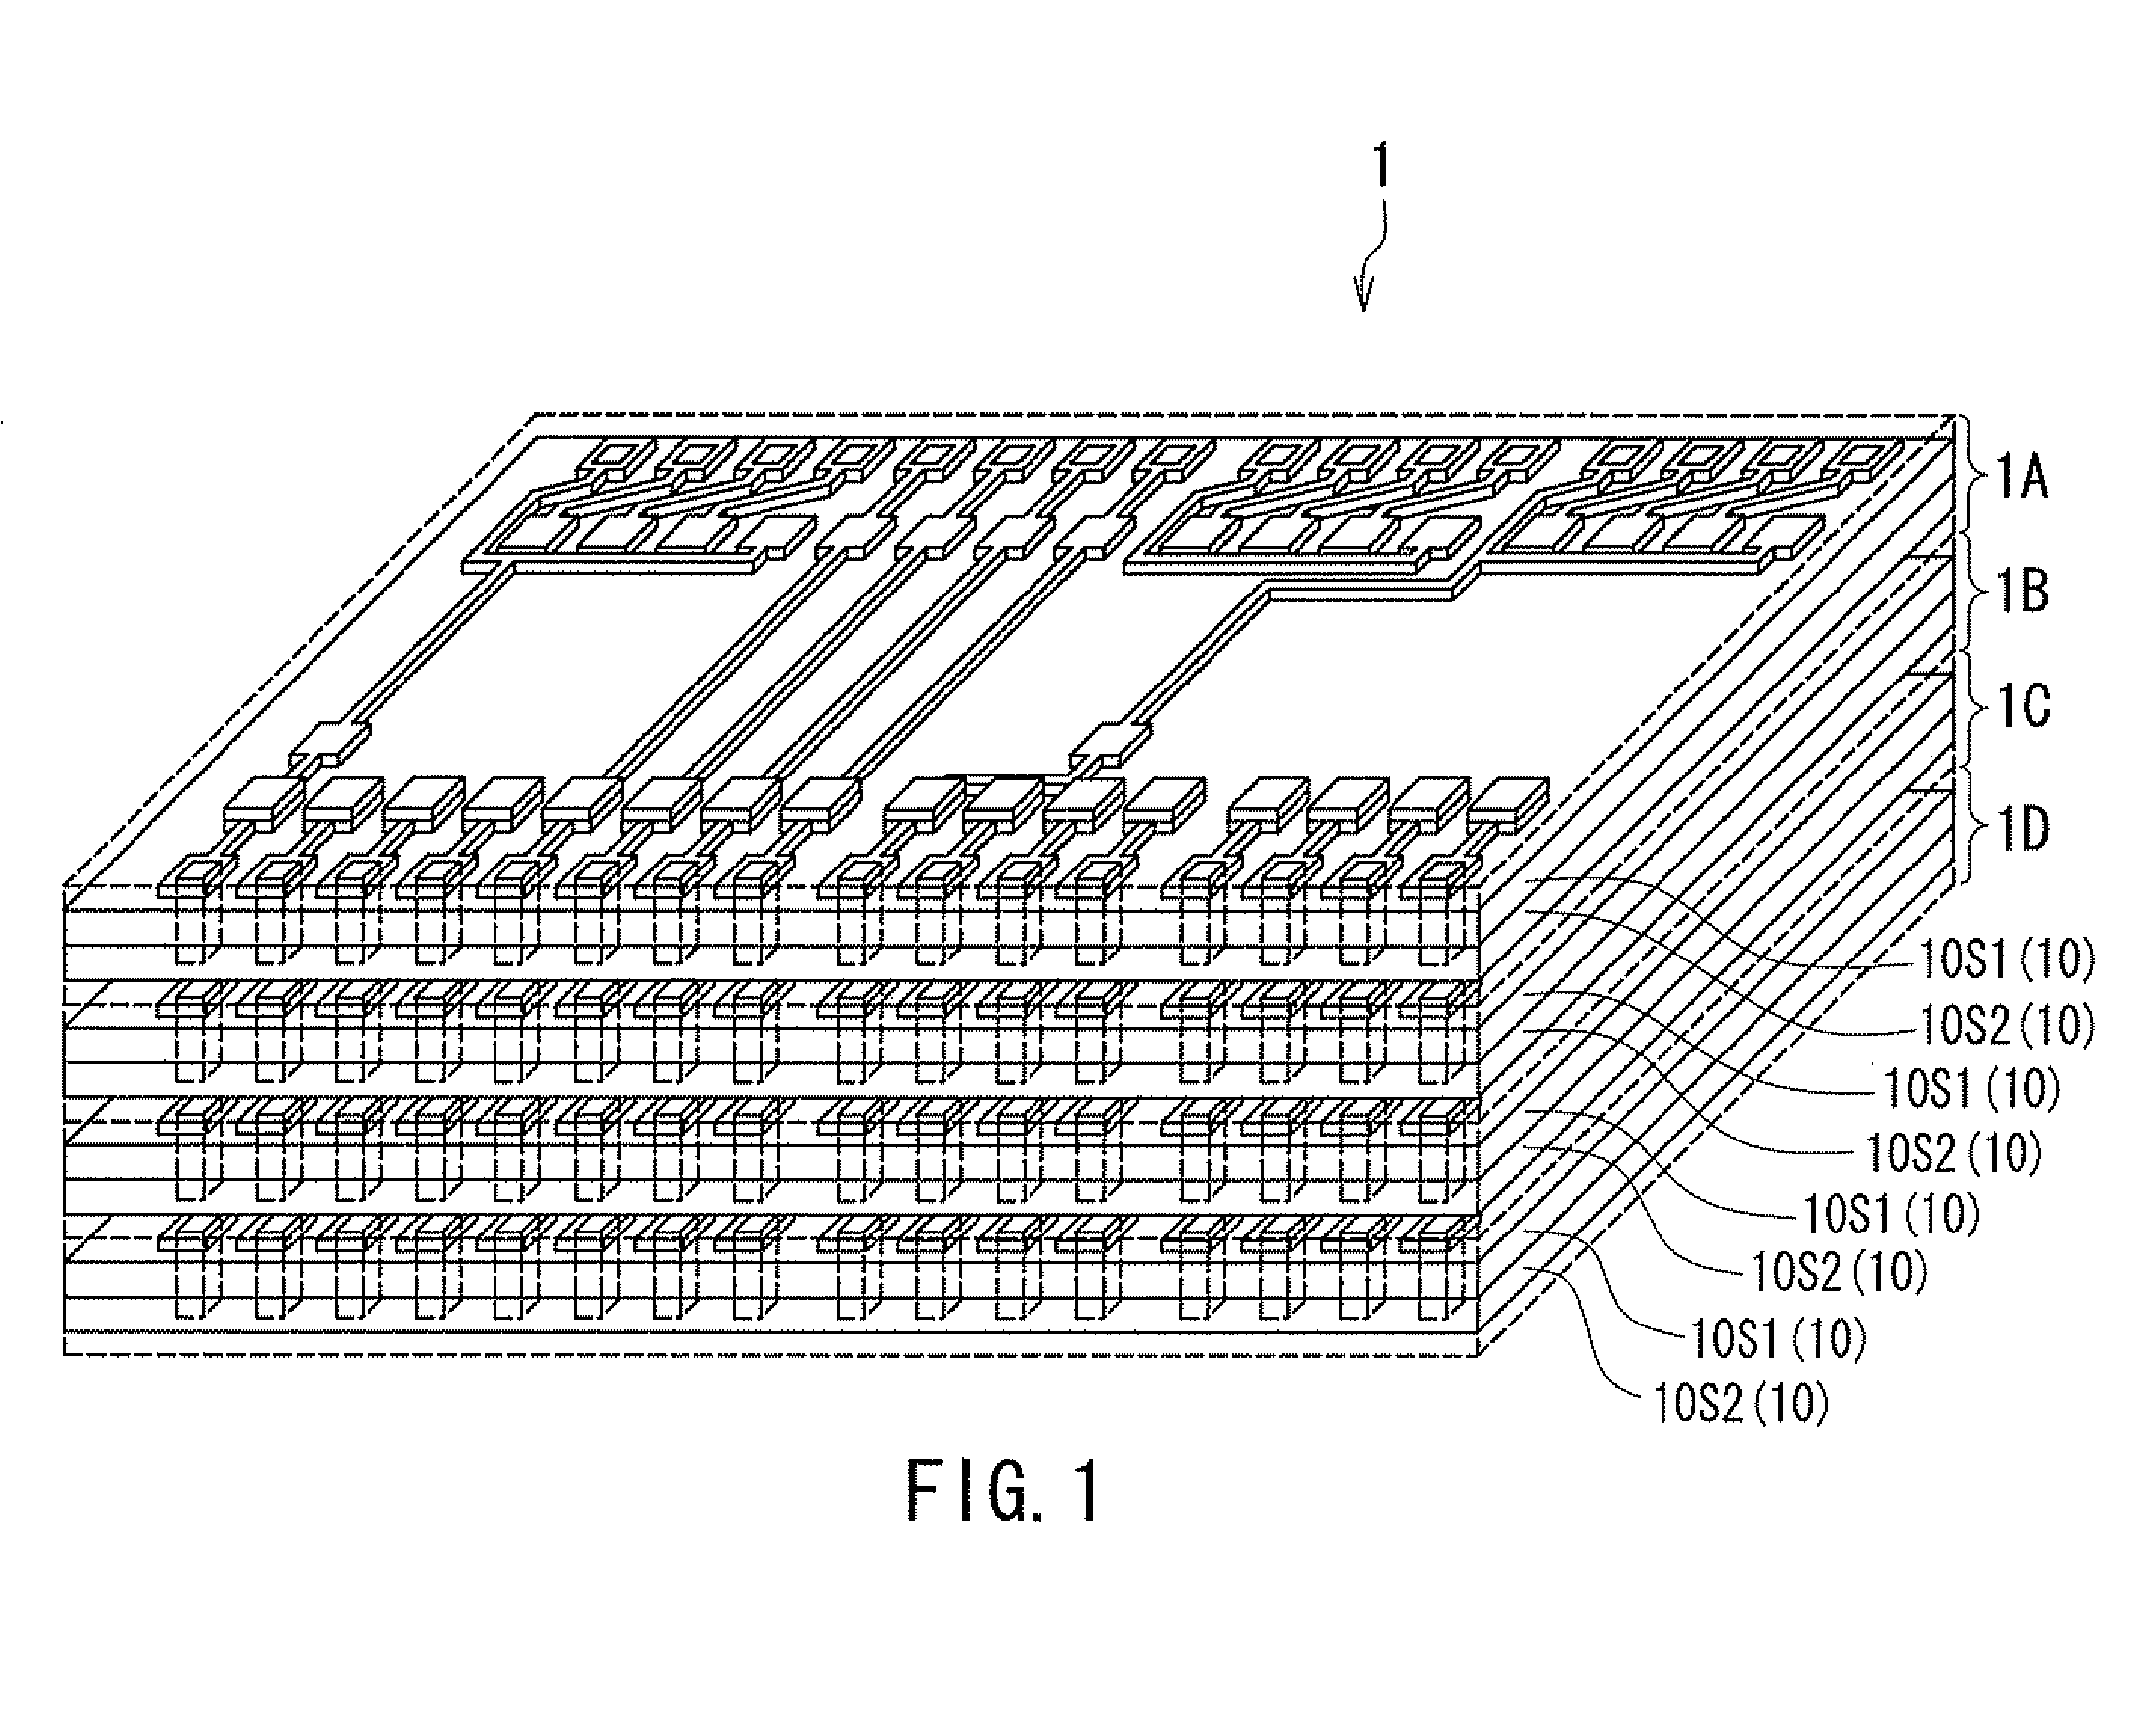 Layered chip package and method of manufacturing same